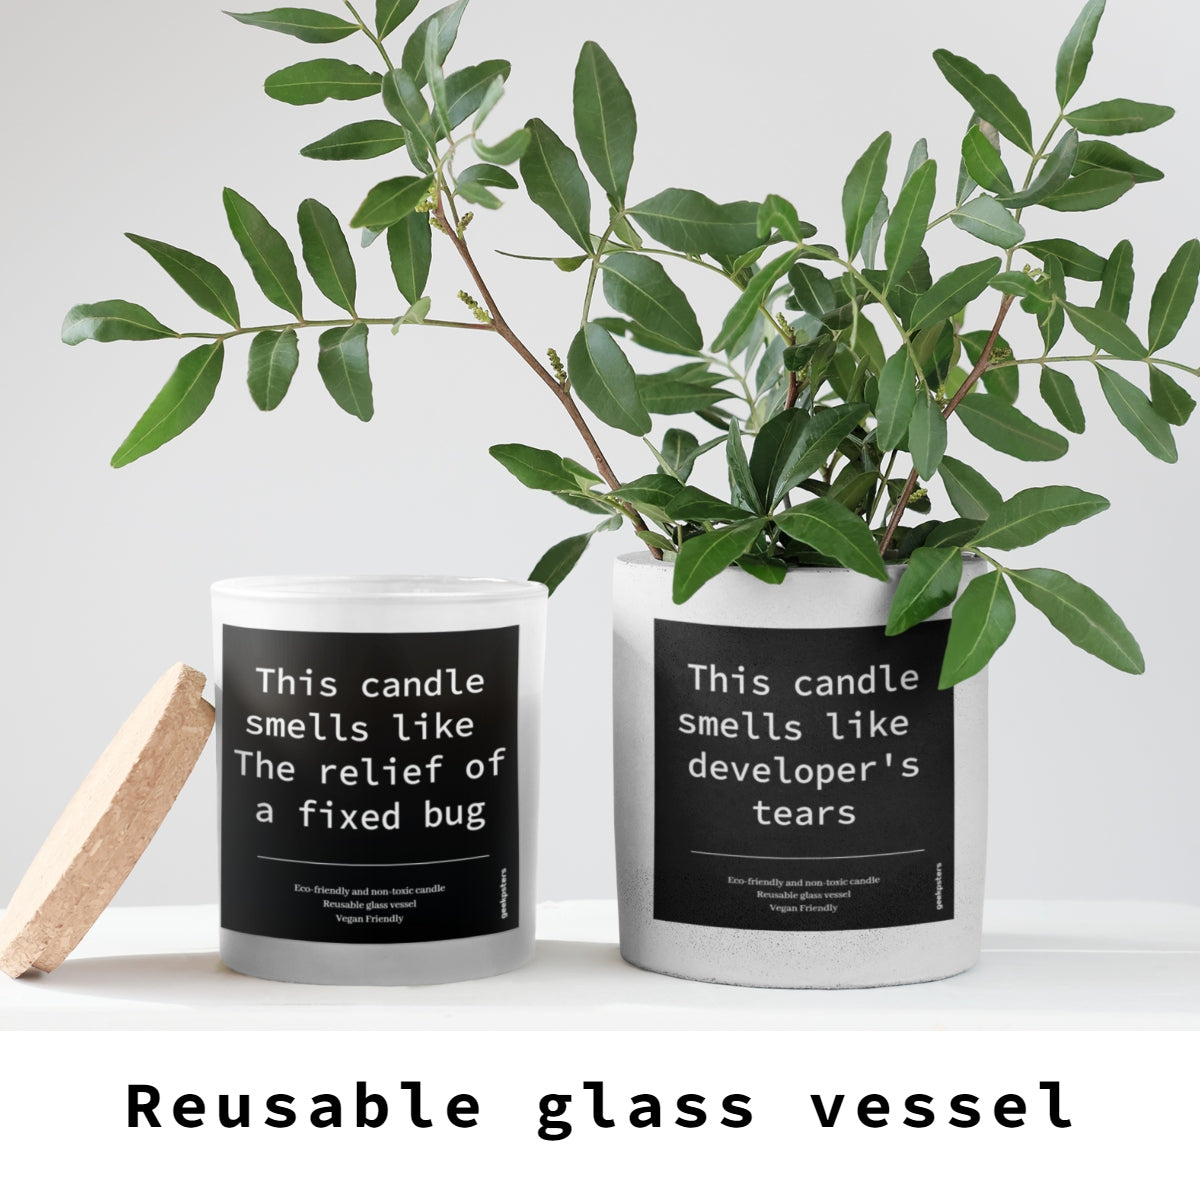 Two "This Candle Smells Like the Stress of a Critical Production Issue" soy candles in reusable glass jars with humorous labels, accompanied by a green plant branch and a small wooden piece, against a light gray background.